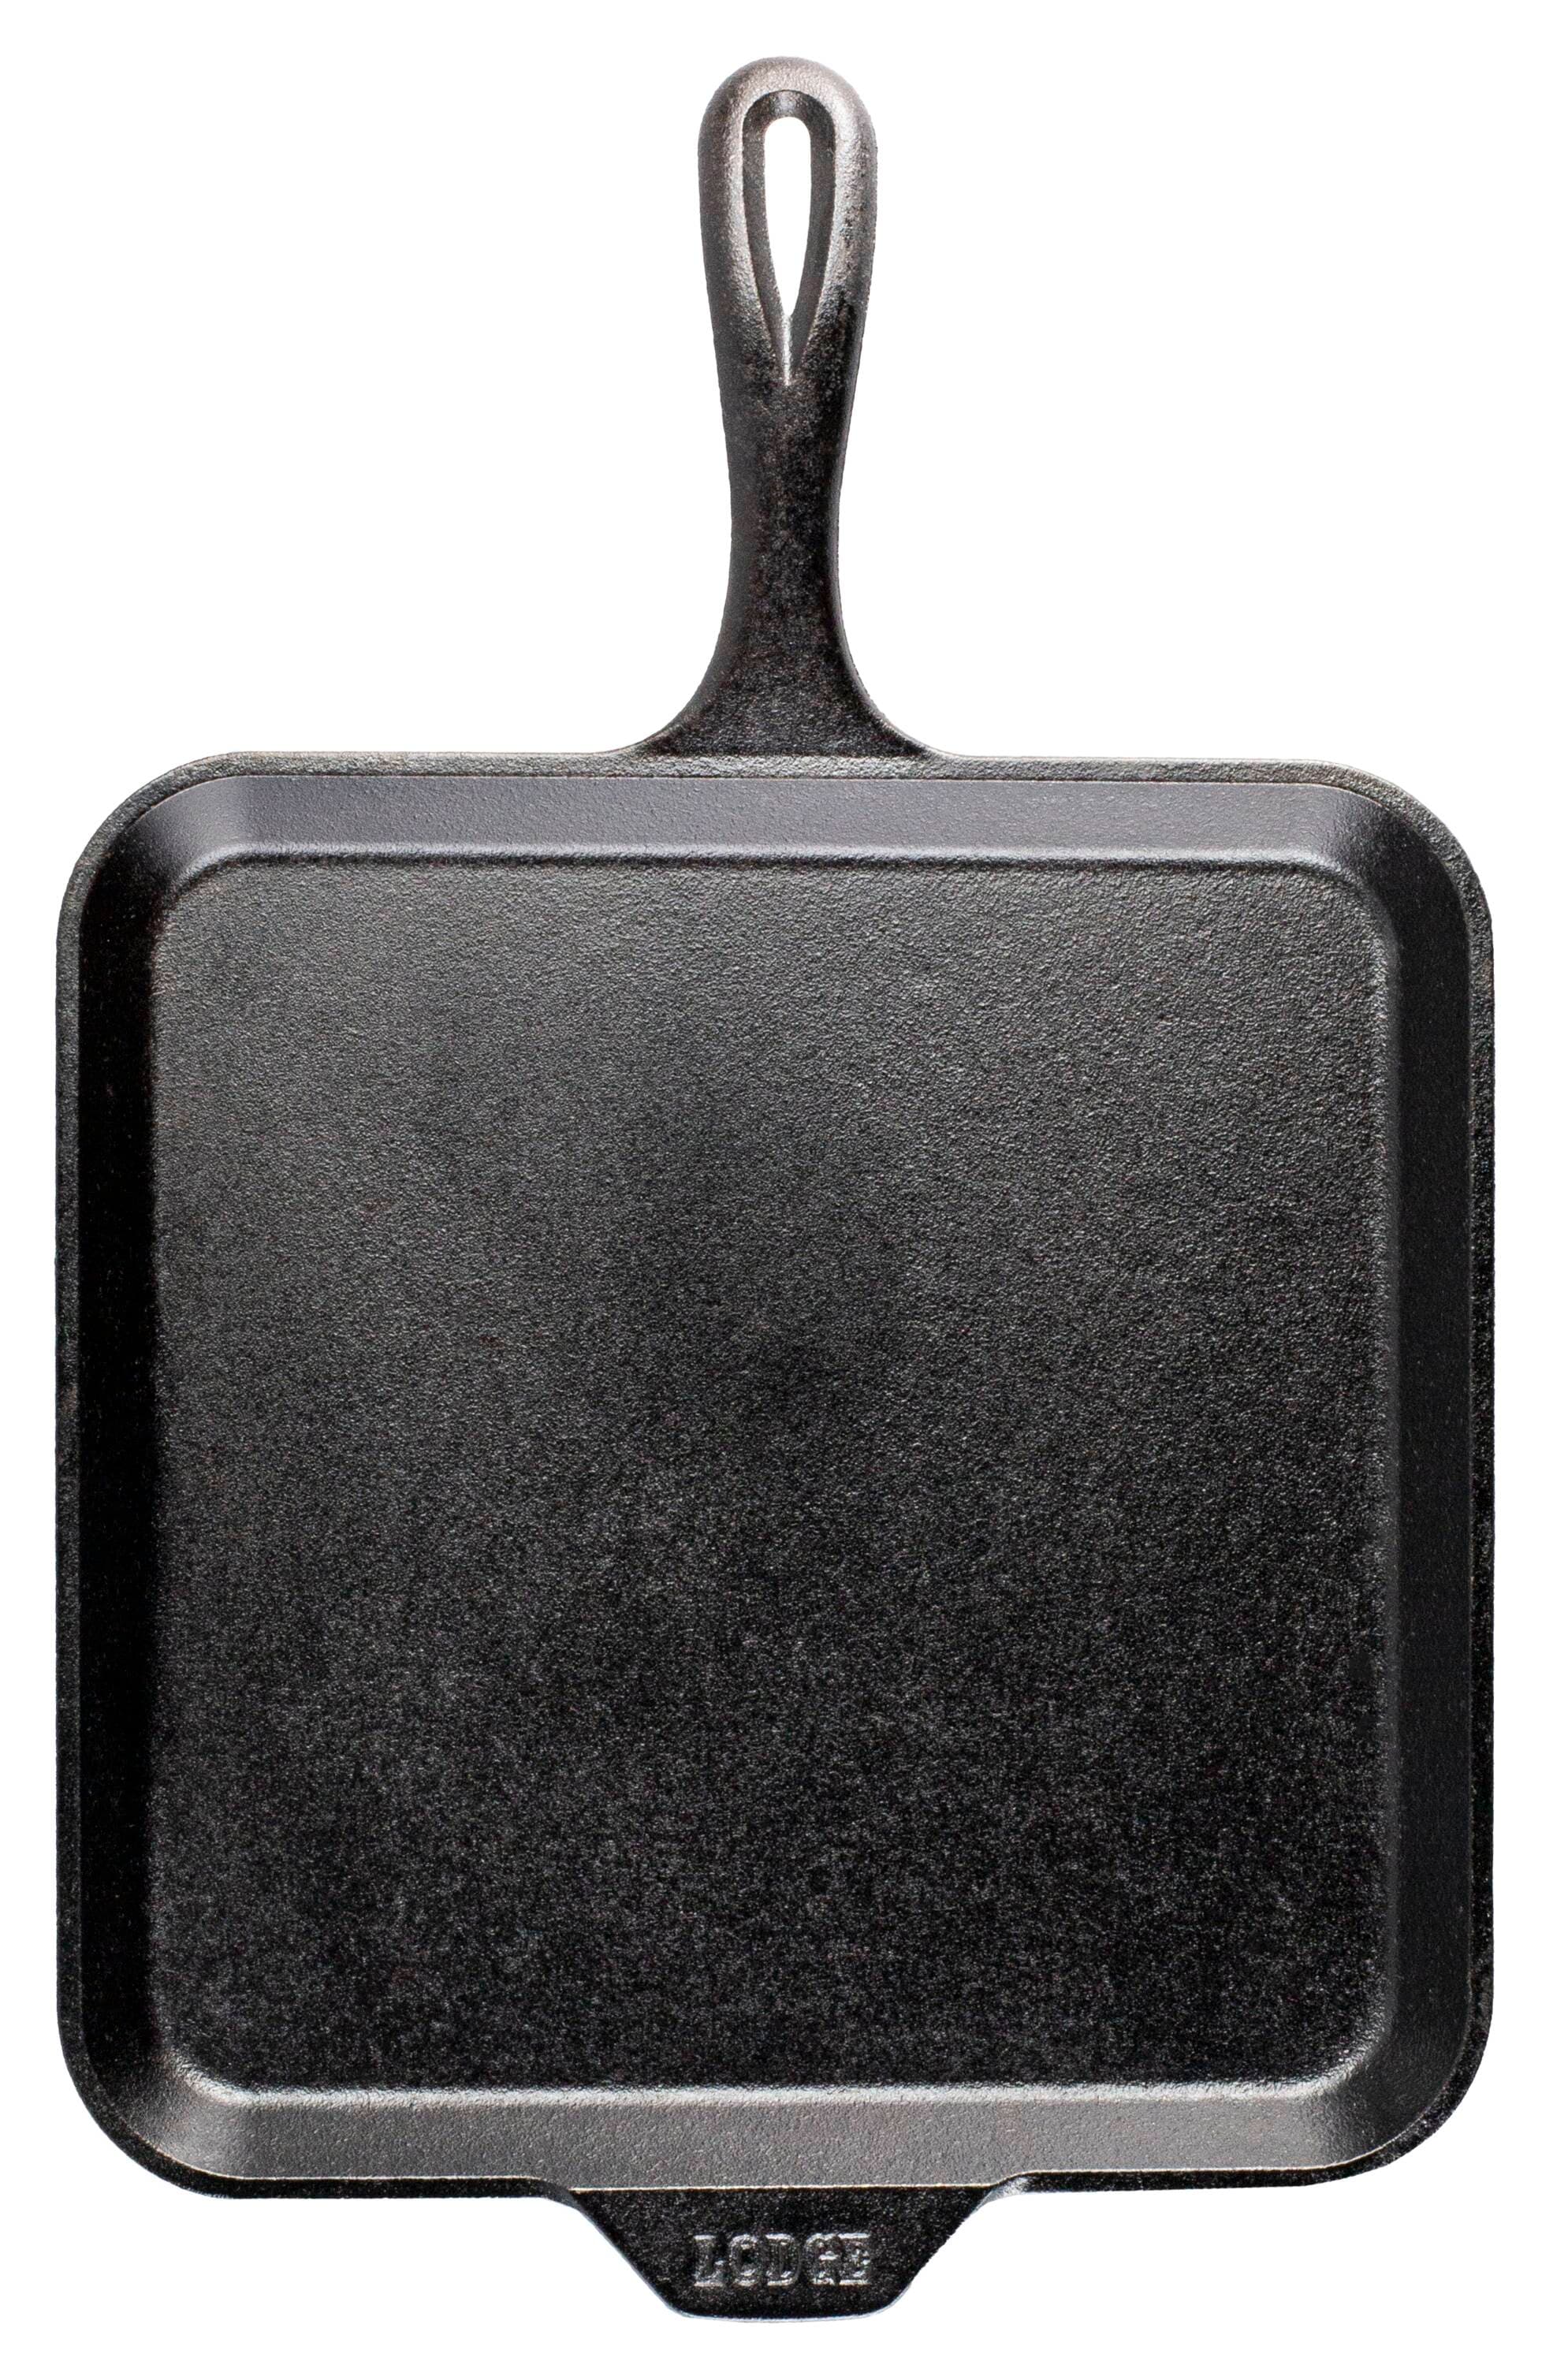 Lodge Cast Iron Cast Iron Griddle with Teardrop Handle, 17.25-in x